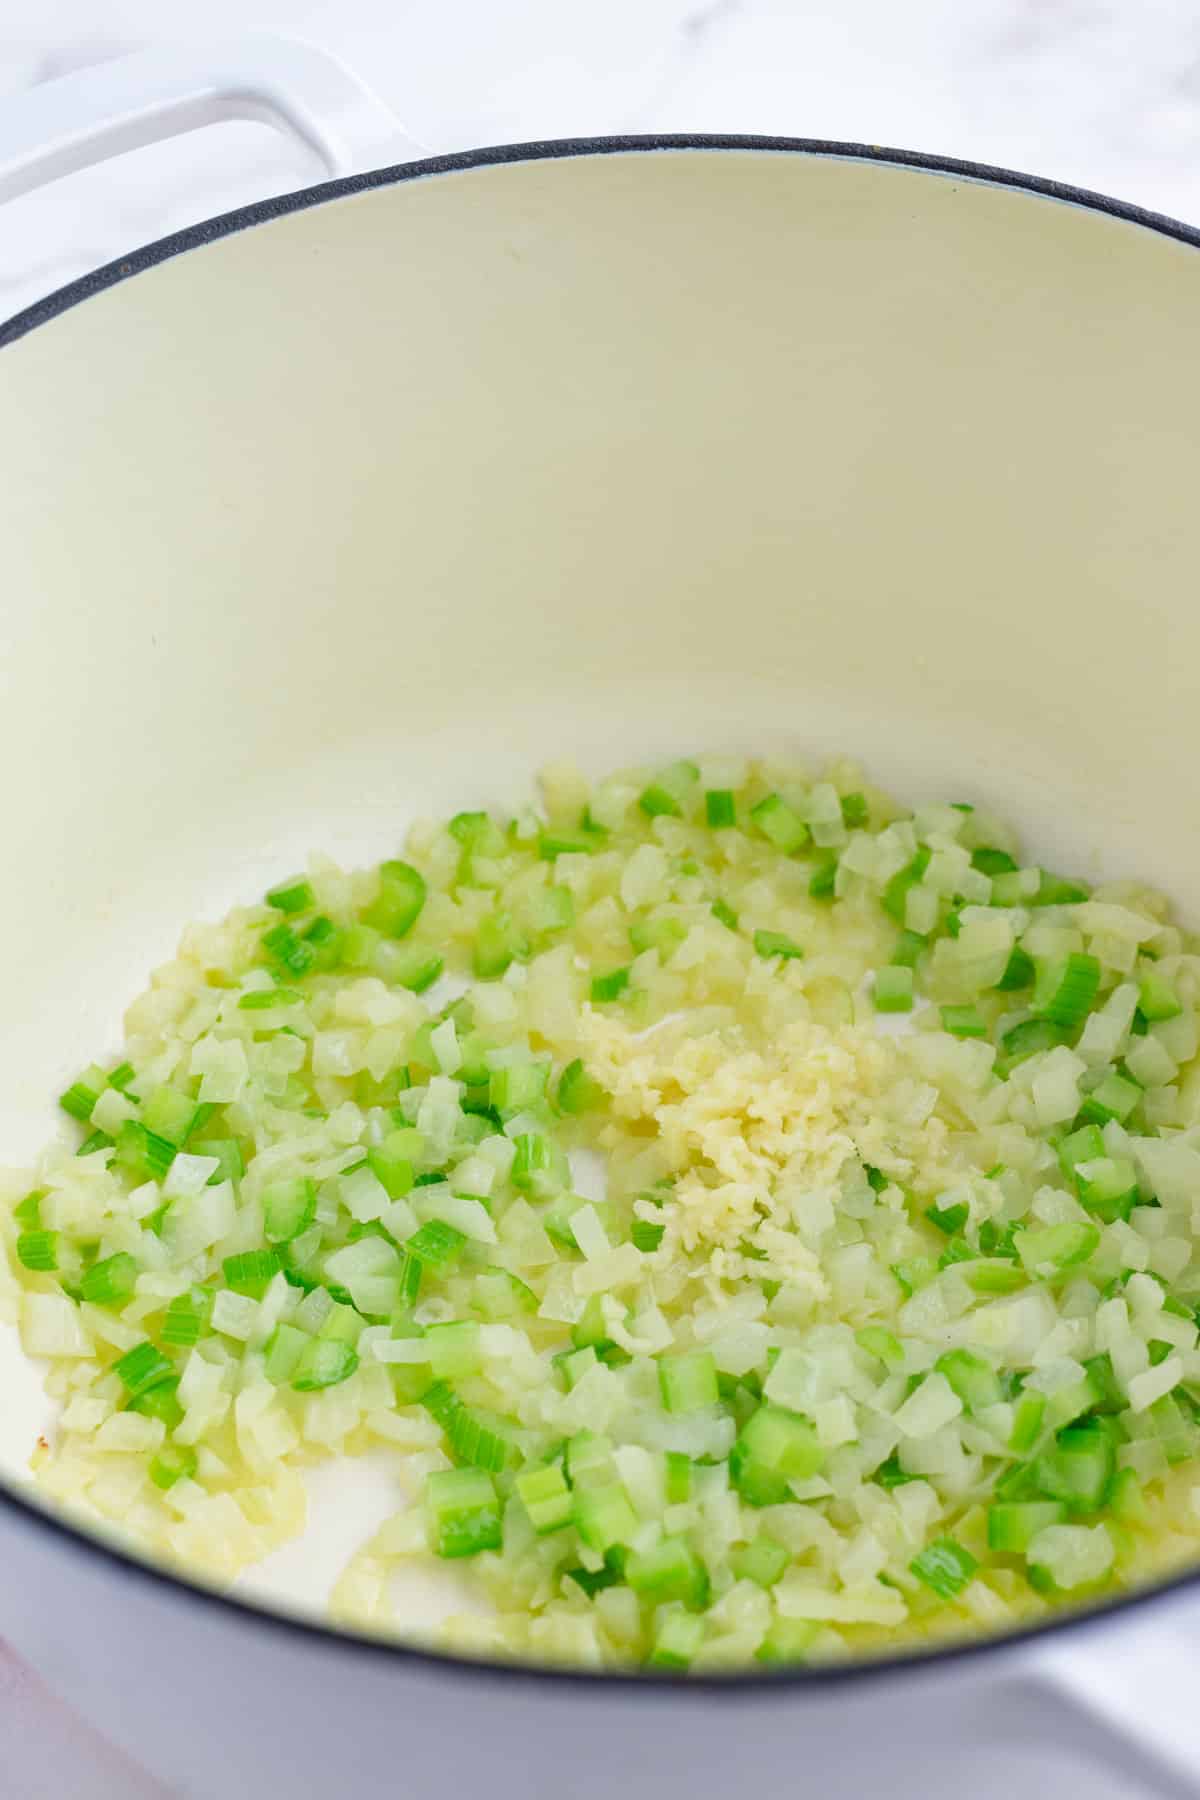 Garlic is added to the onion and celery.